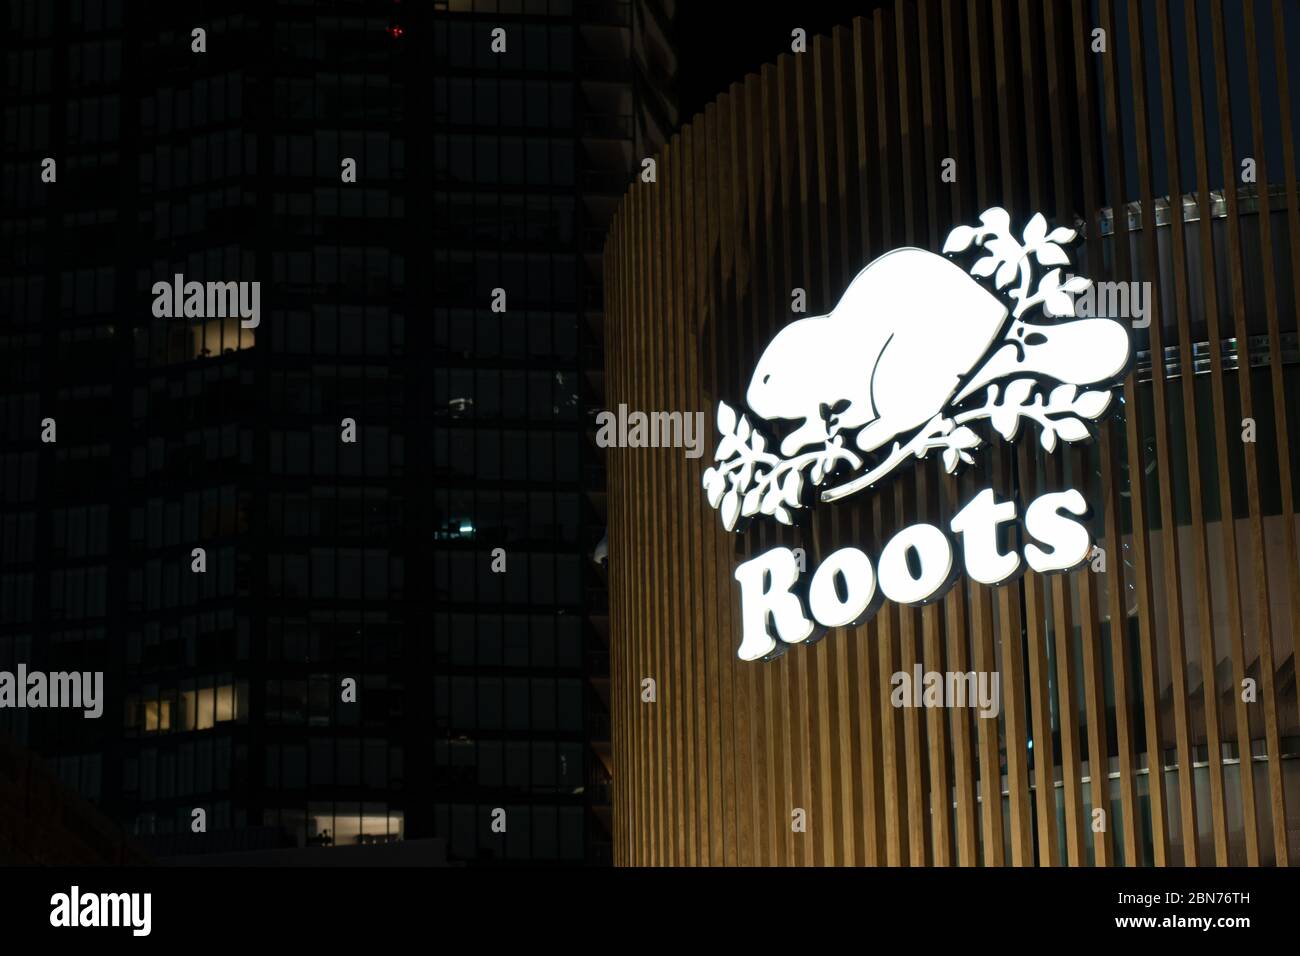 Roots Canada logo, a popular Canadian appeal company, seen atop of a store in downtown Toronto at night. Stock Photo